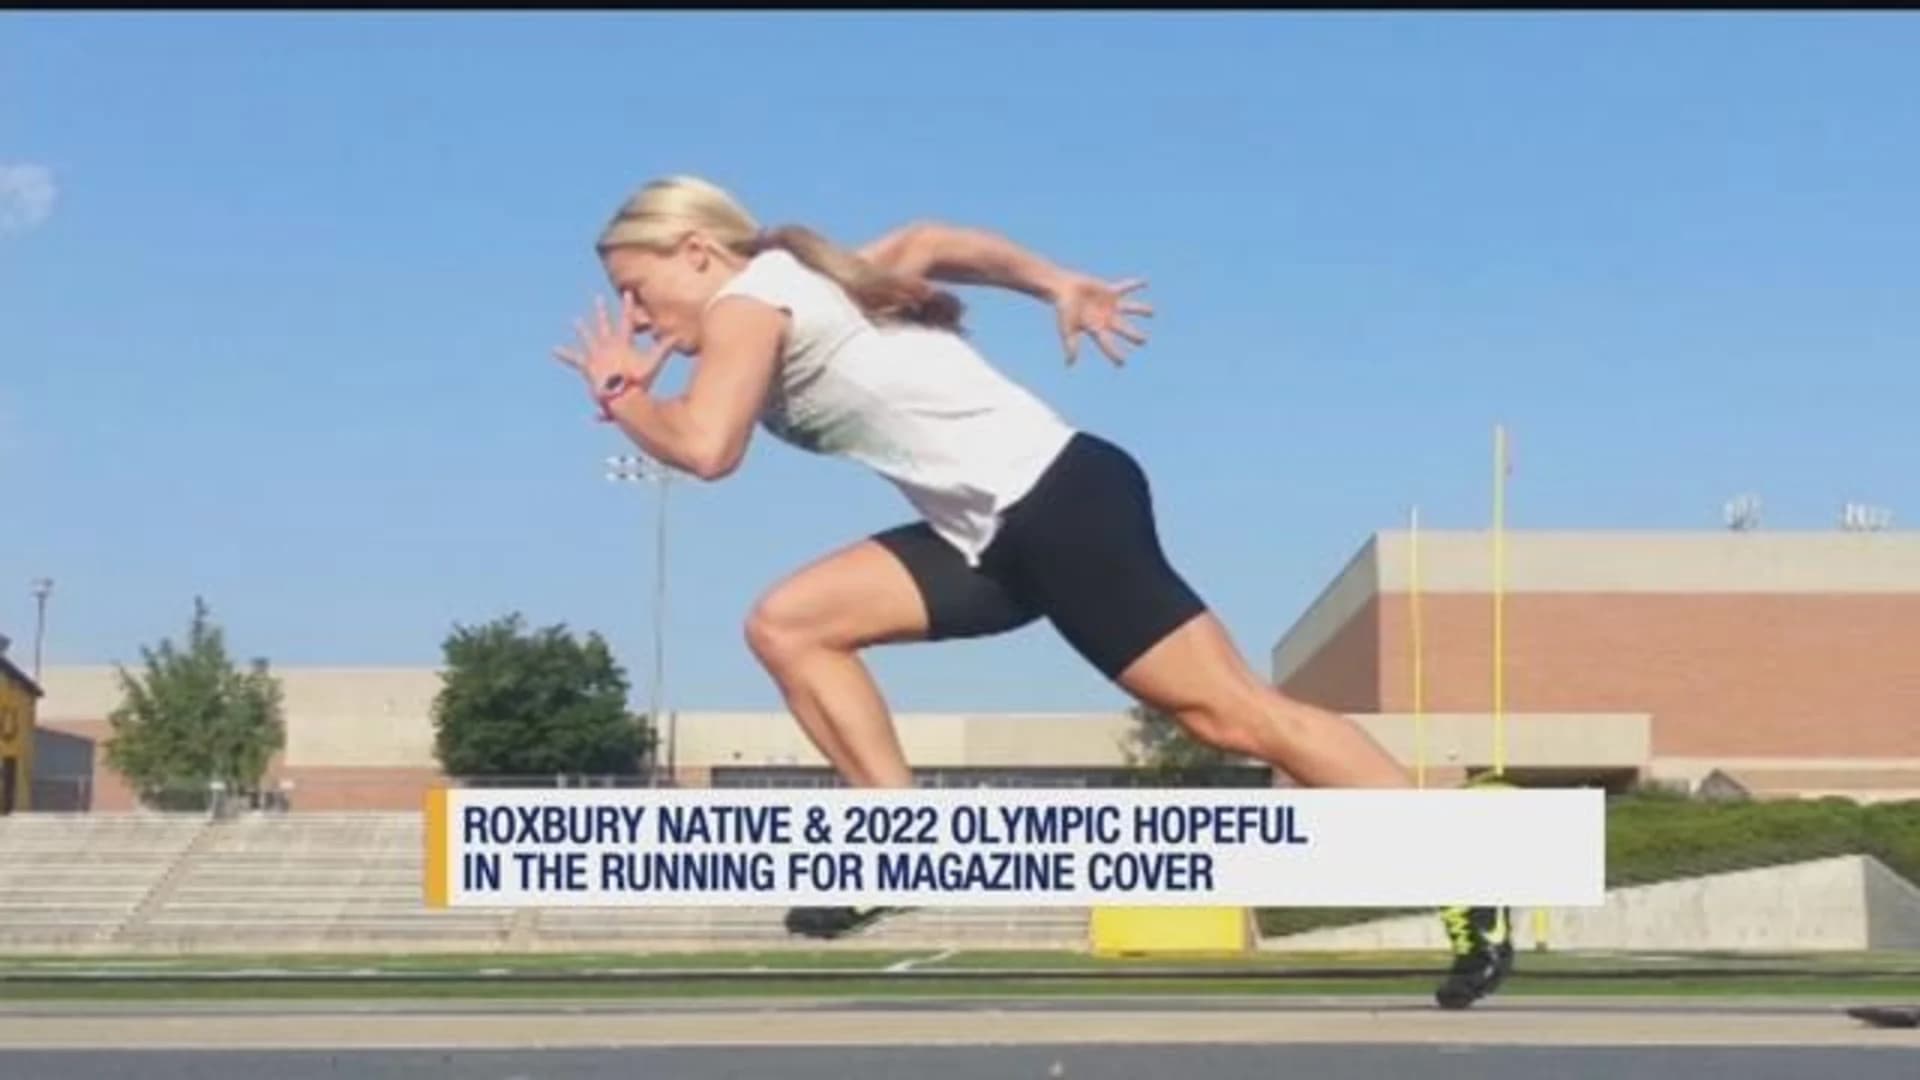 Vote for Megan: Olympian, Army reservist from Roxbury vies for Jetset cover